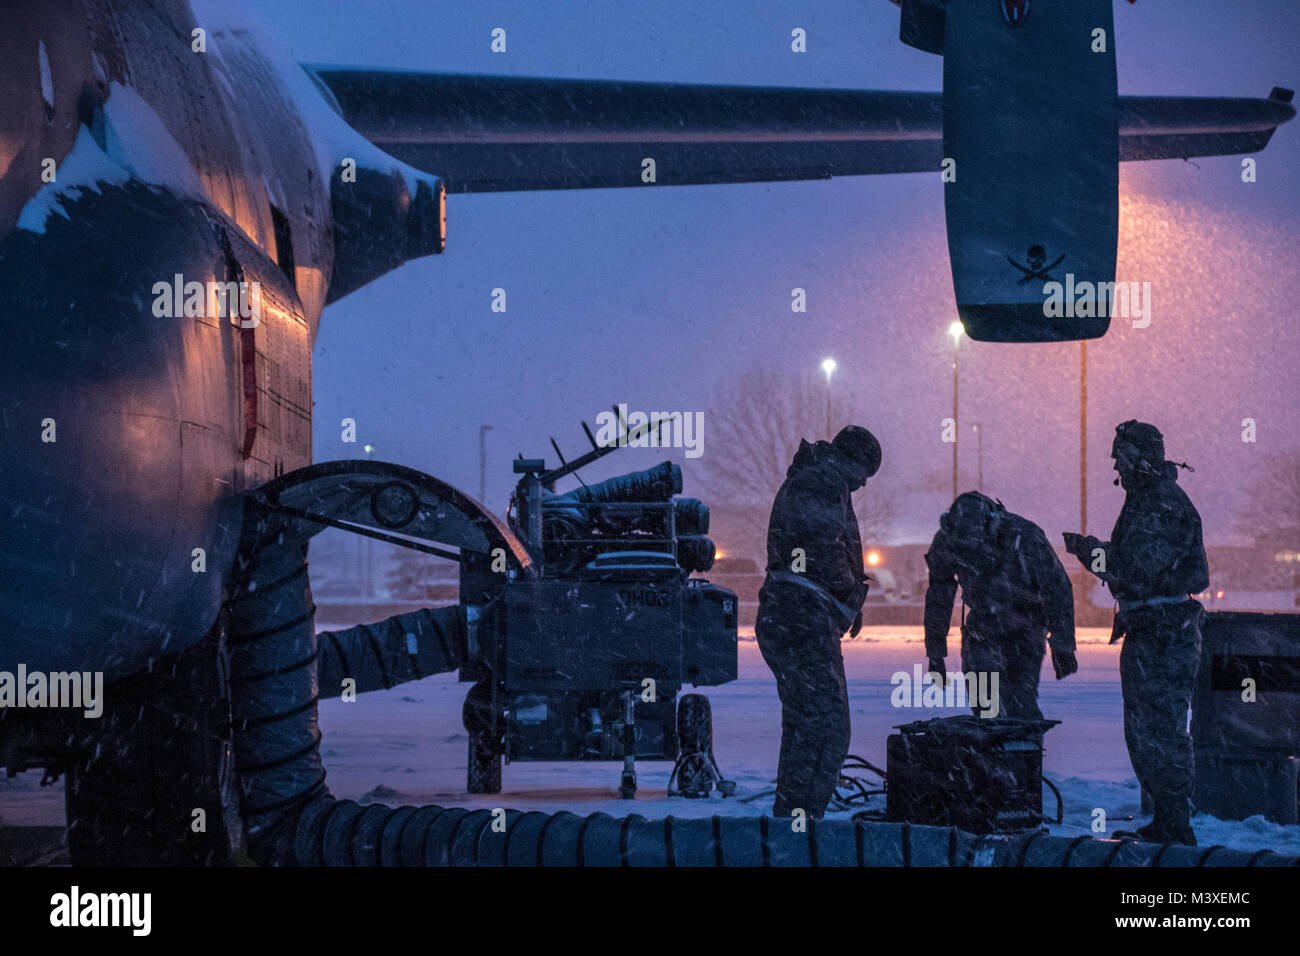 Airmen work on the brake systems of a C-130H Hercules during a snow storm, Feb. 07, 2018, at the 179th Airlift Wing, Mansfield, Ohio. The 179th Airlift Wing maintenance group regularly inspects all aspects of their aircraft to maintain mission readiness with ready airmen and ready aircraft. (U.S. Air National Guard photo by Tech. Sgt. Joe HarwoodReleased) Stock Photo